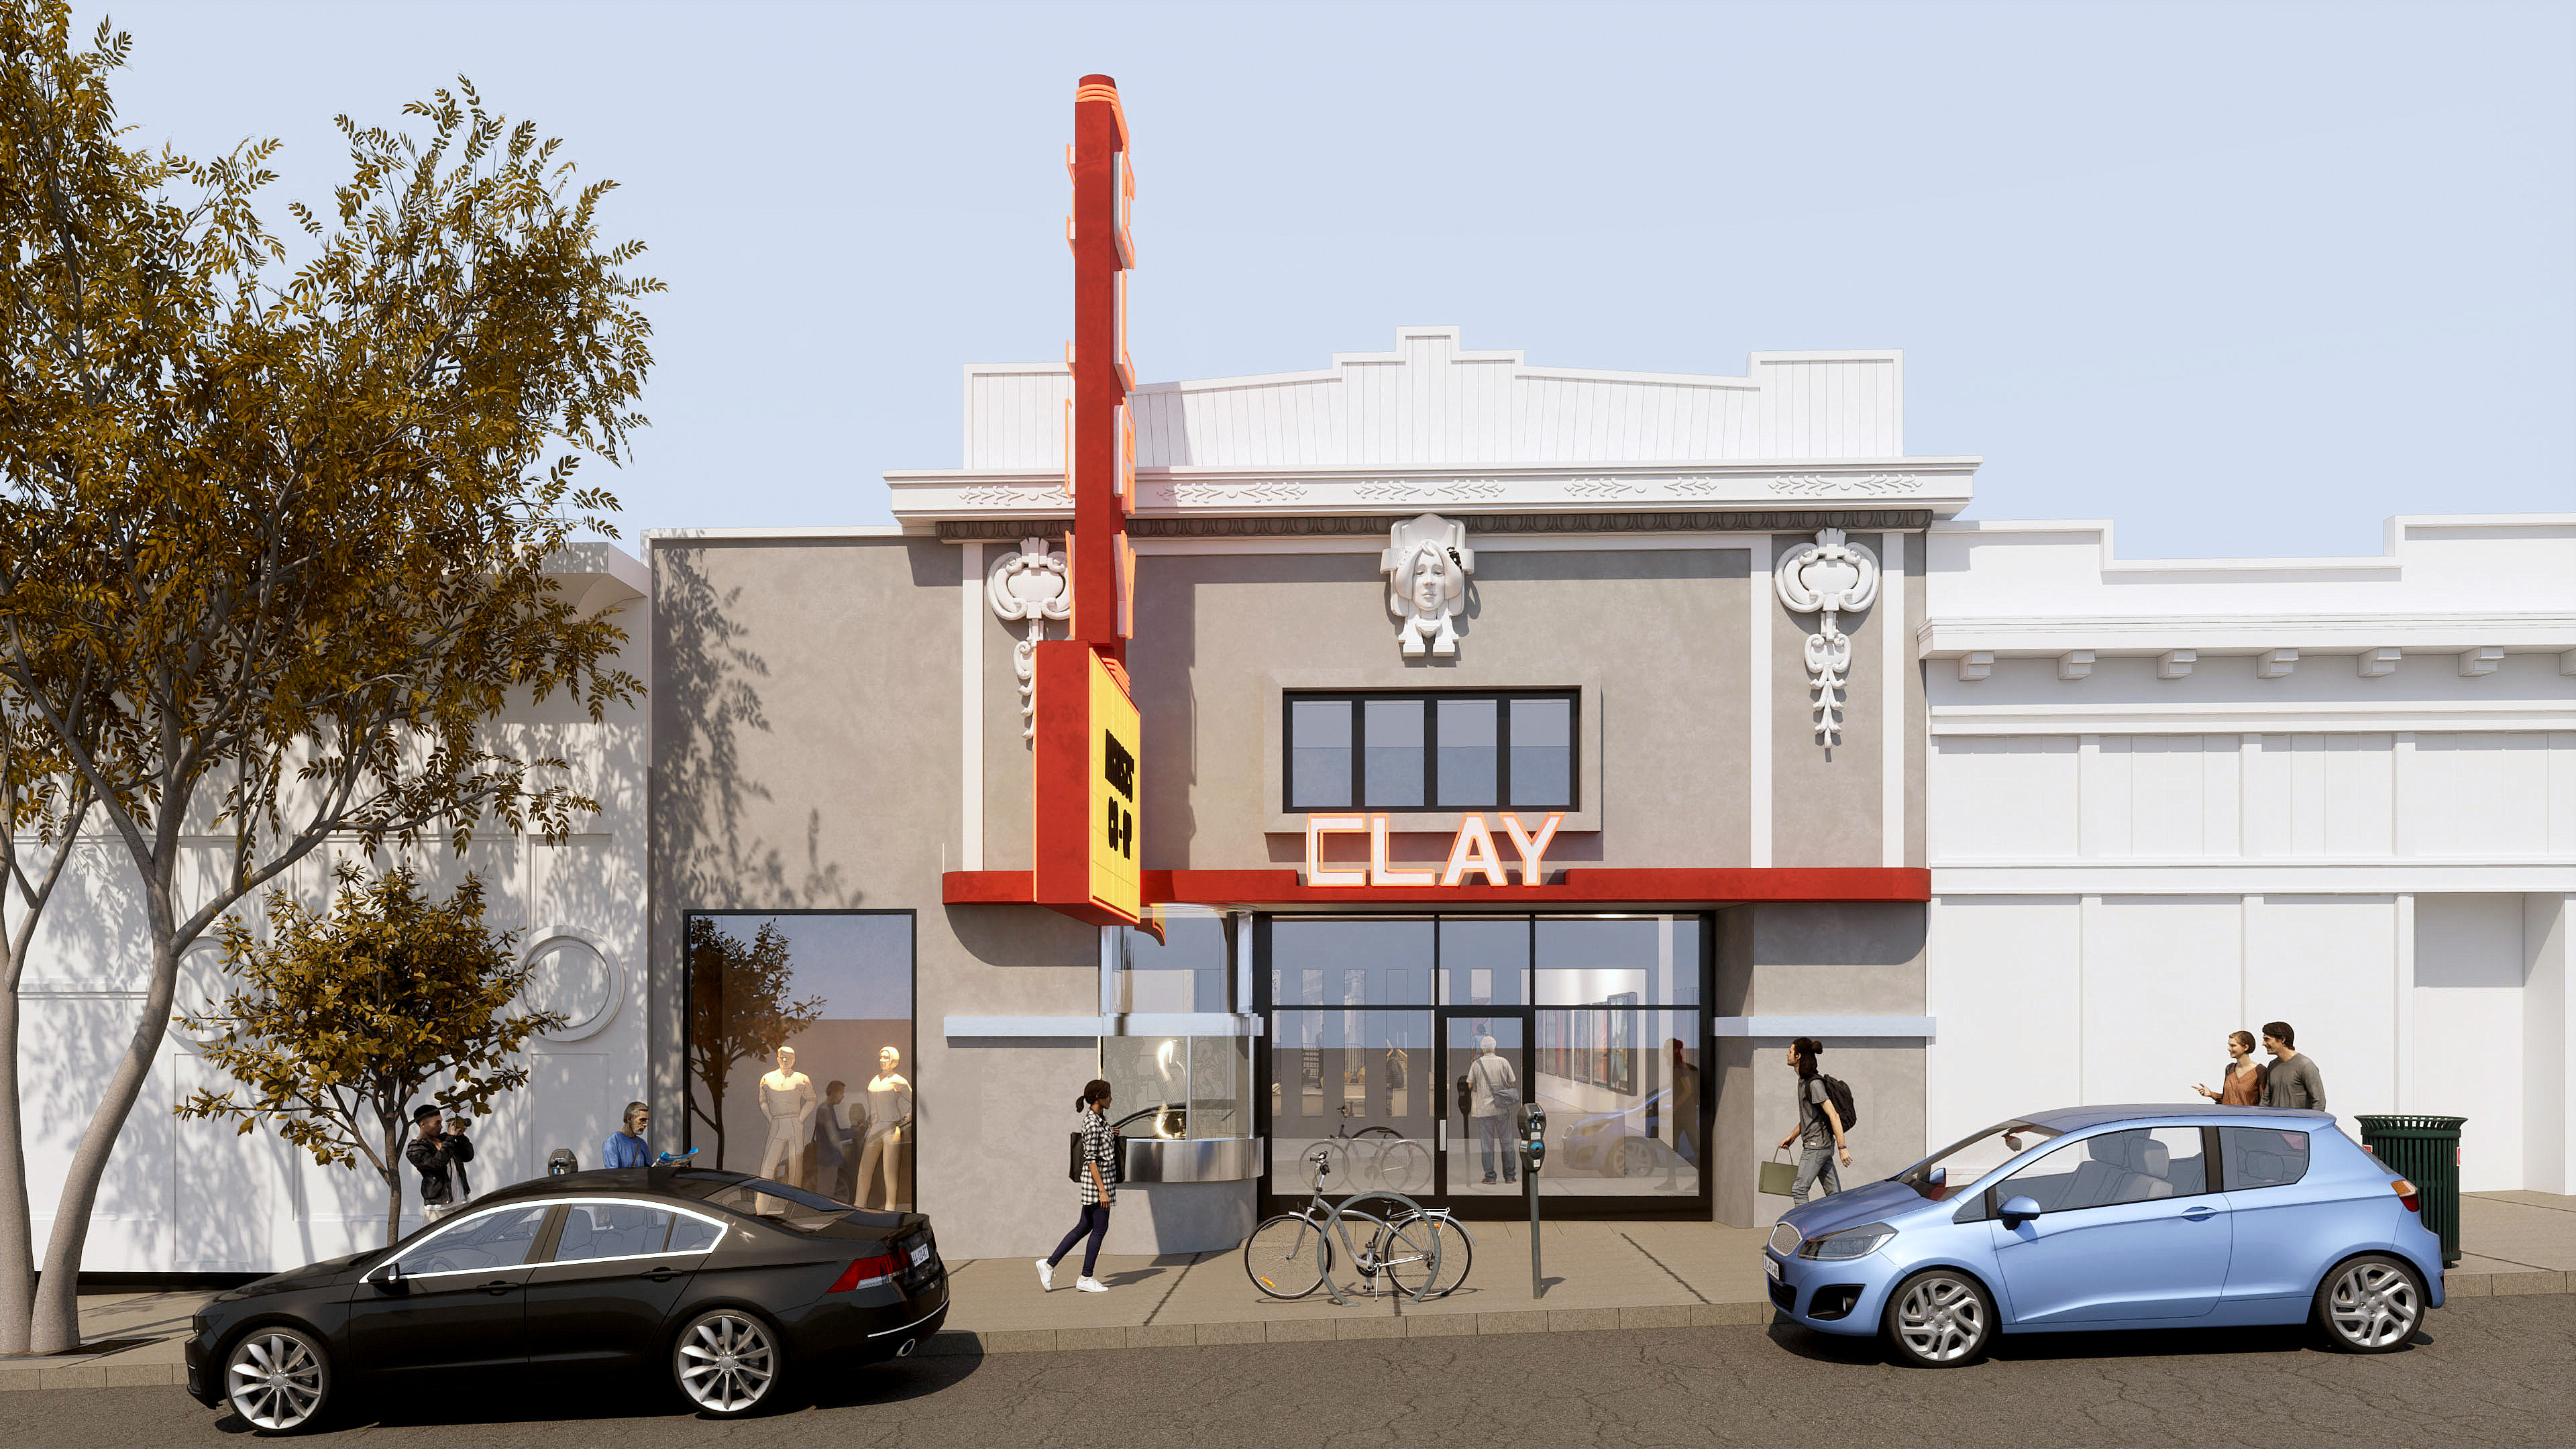 Exterior restoration plan for the Clay Theater